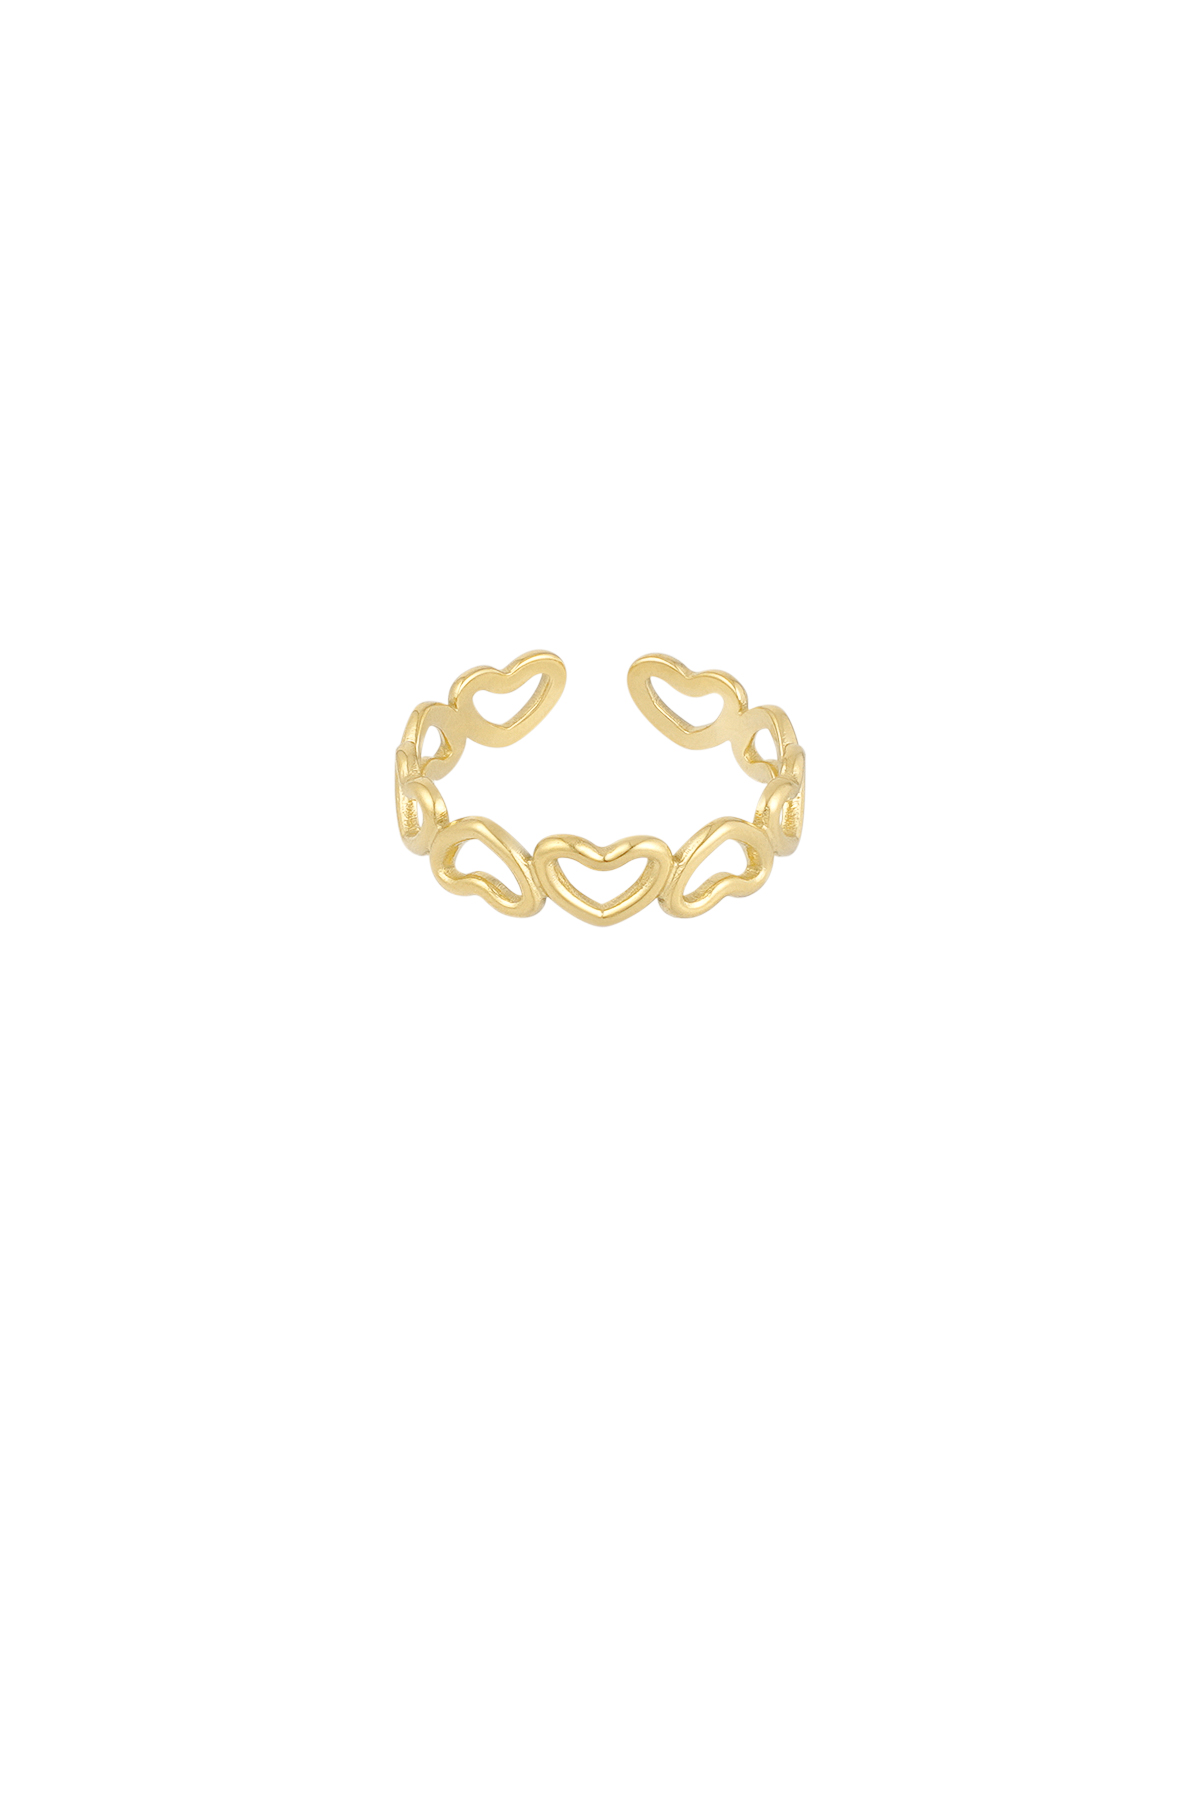 Ring „Love“ – Gold  h5 